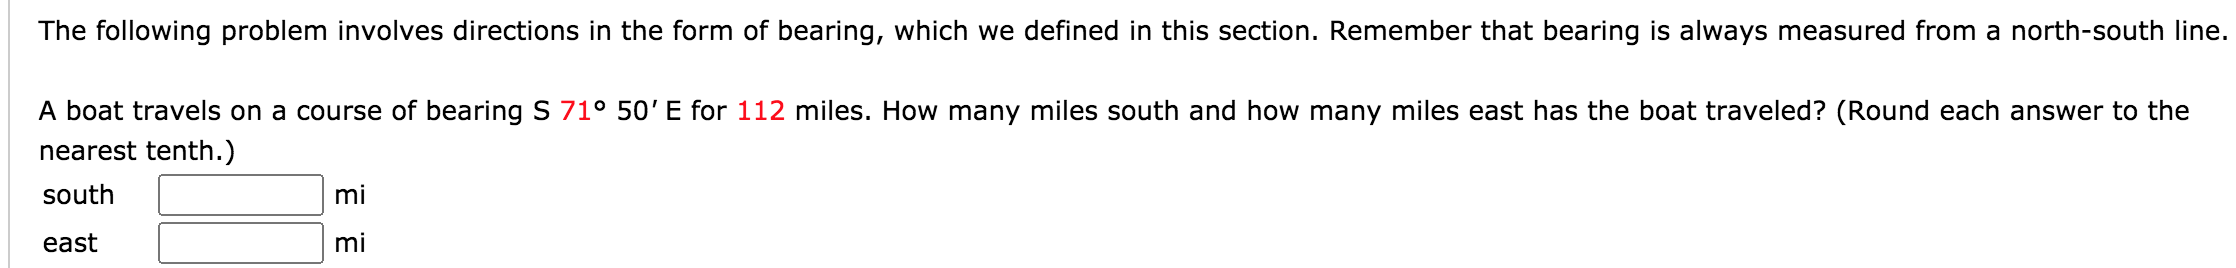 The following problem involves directions in the form of bearing, which we defined in this section. Remember that bearing is always measured from a north-south line.
A boat travels on a course of bearing S 71° 50' E for 112 miles. How many miles south and how many miles east has the boat traveled? (Round each answer to the
nearest tenth.)
south
mi
east
mi
